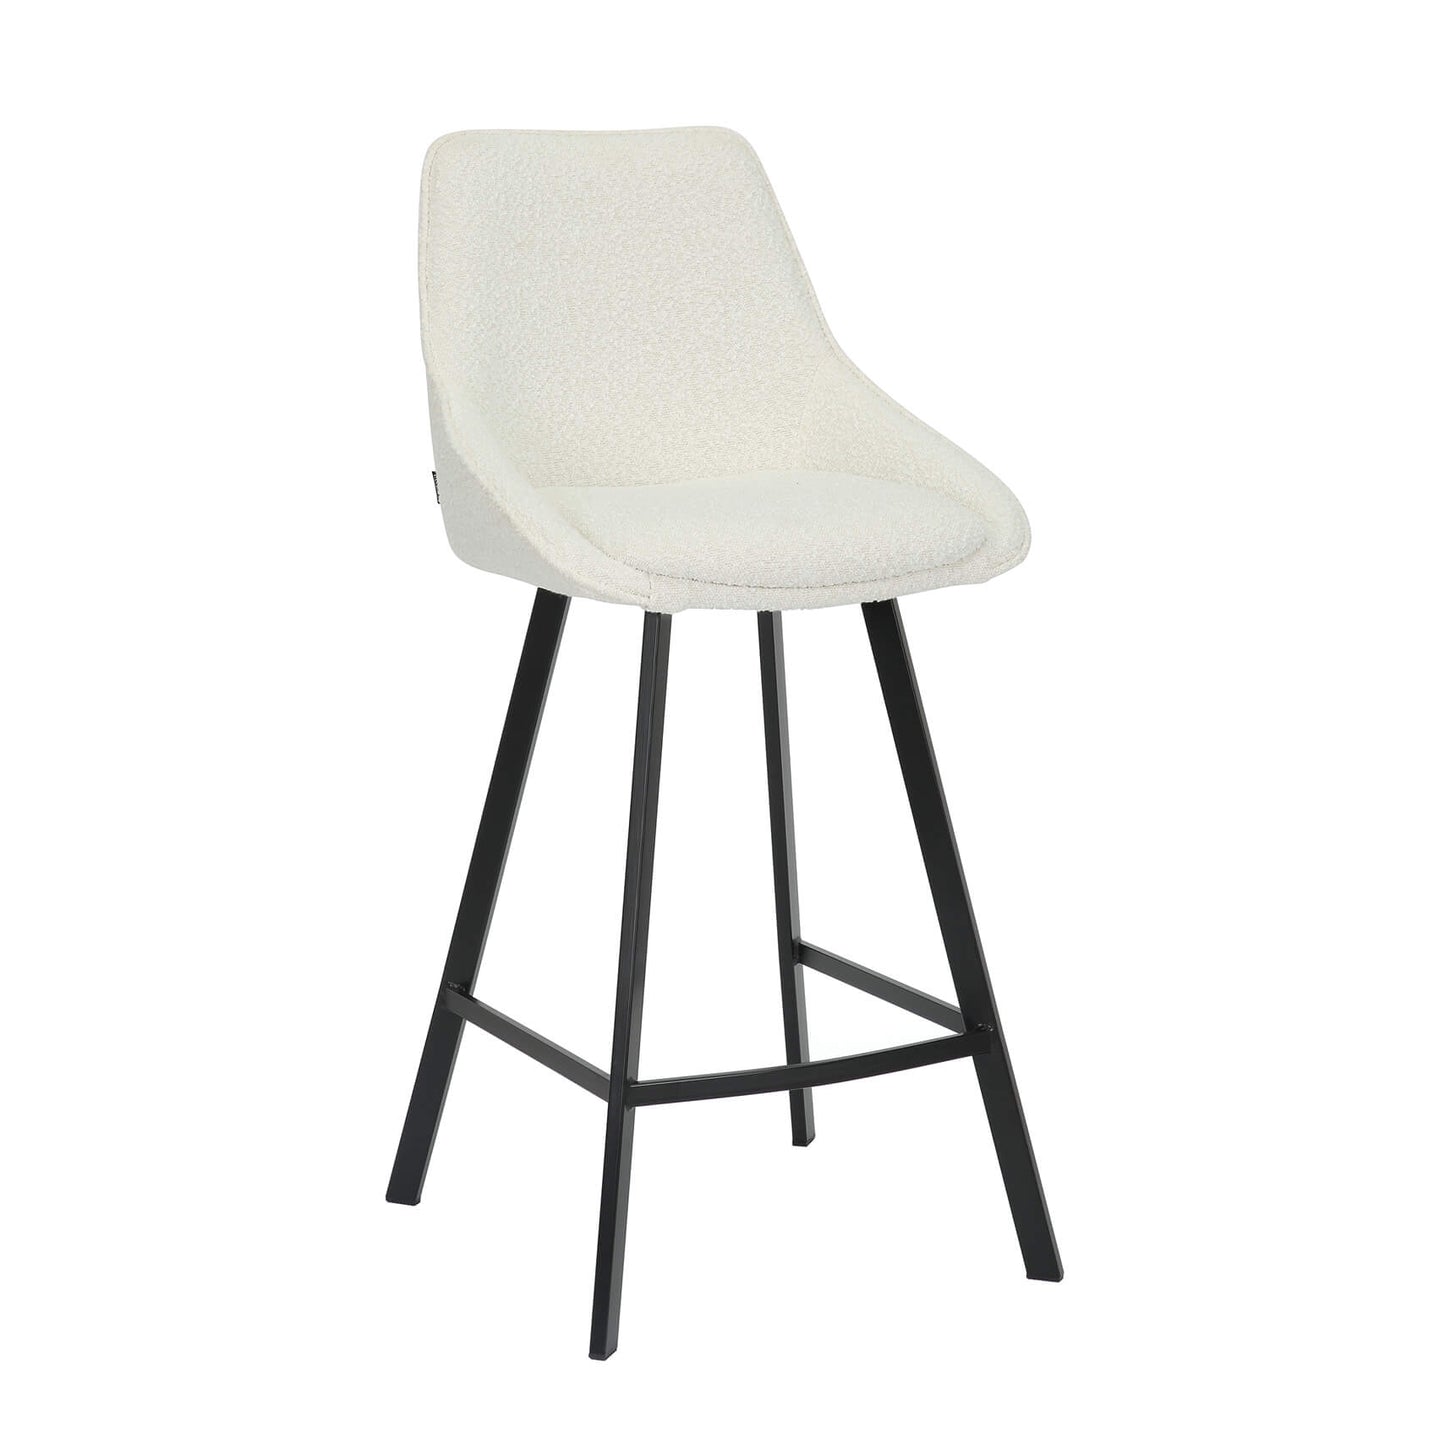 Amberley | Contemporary Metal White Sand Fabric Bar Stools | Set Of 2 | White